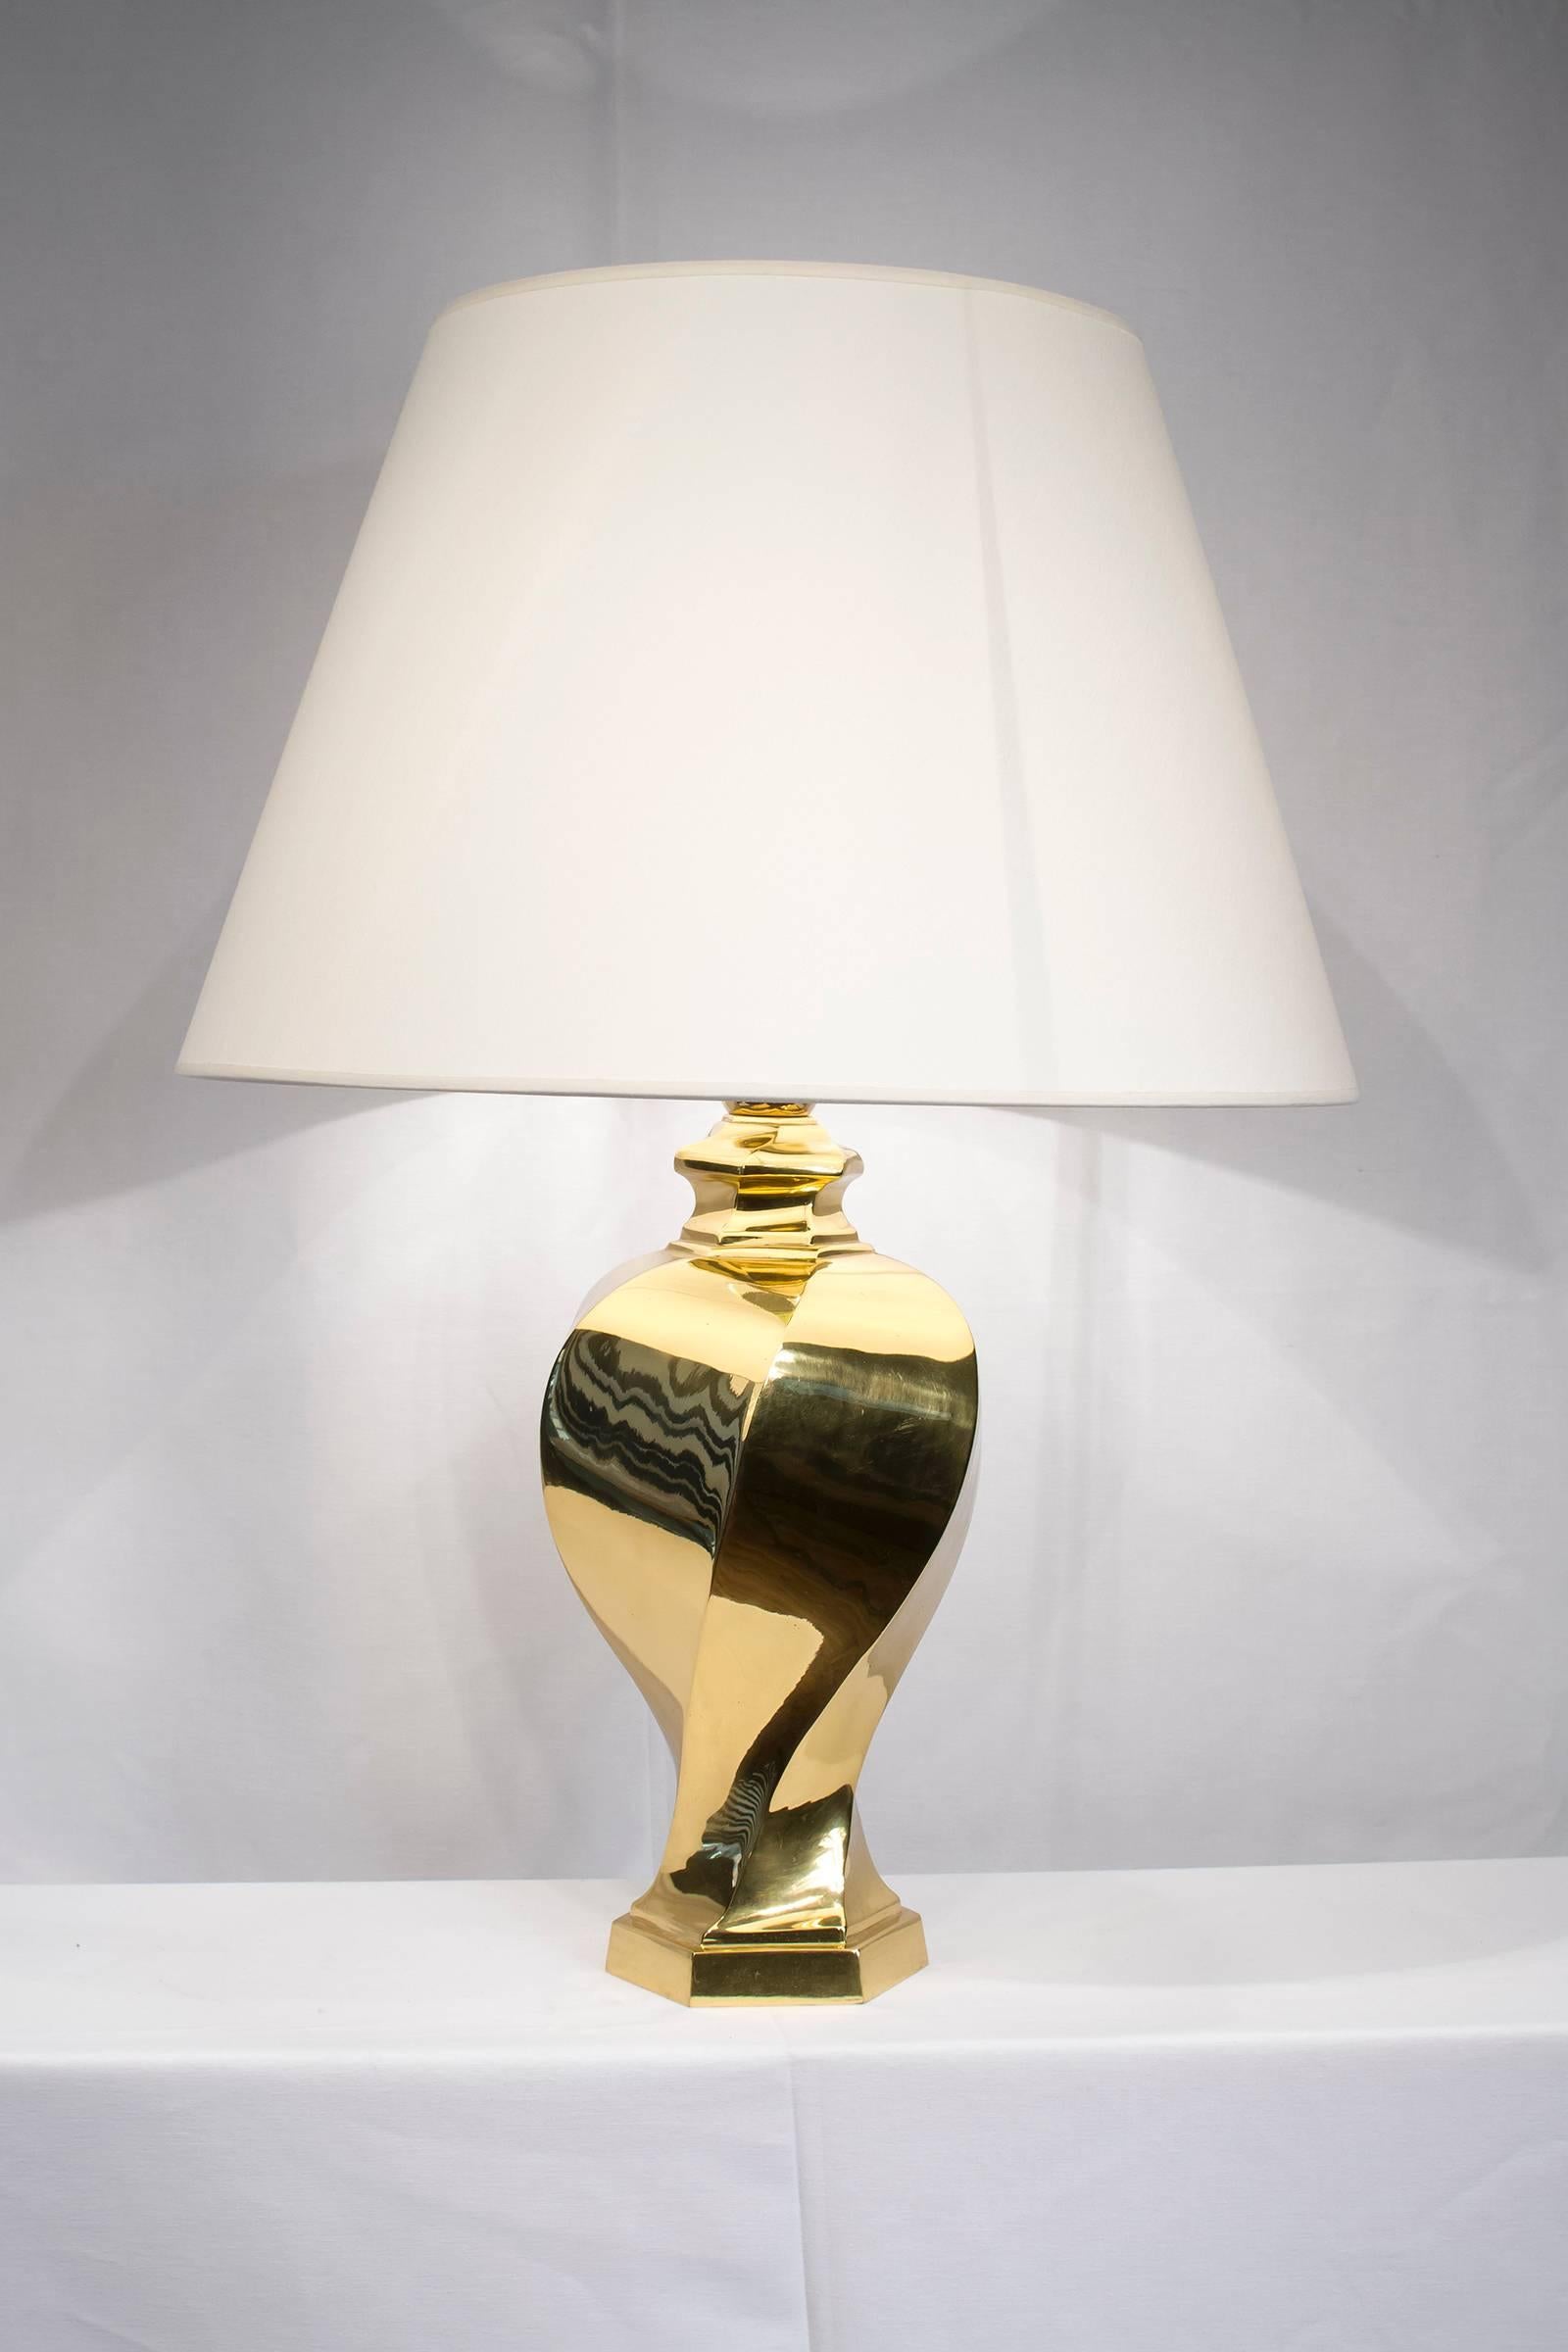 Brass twisted jar form table lamps. Included shades.

Please contact us for delivery details.